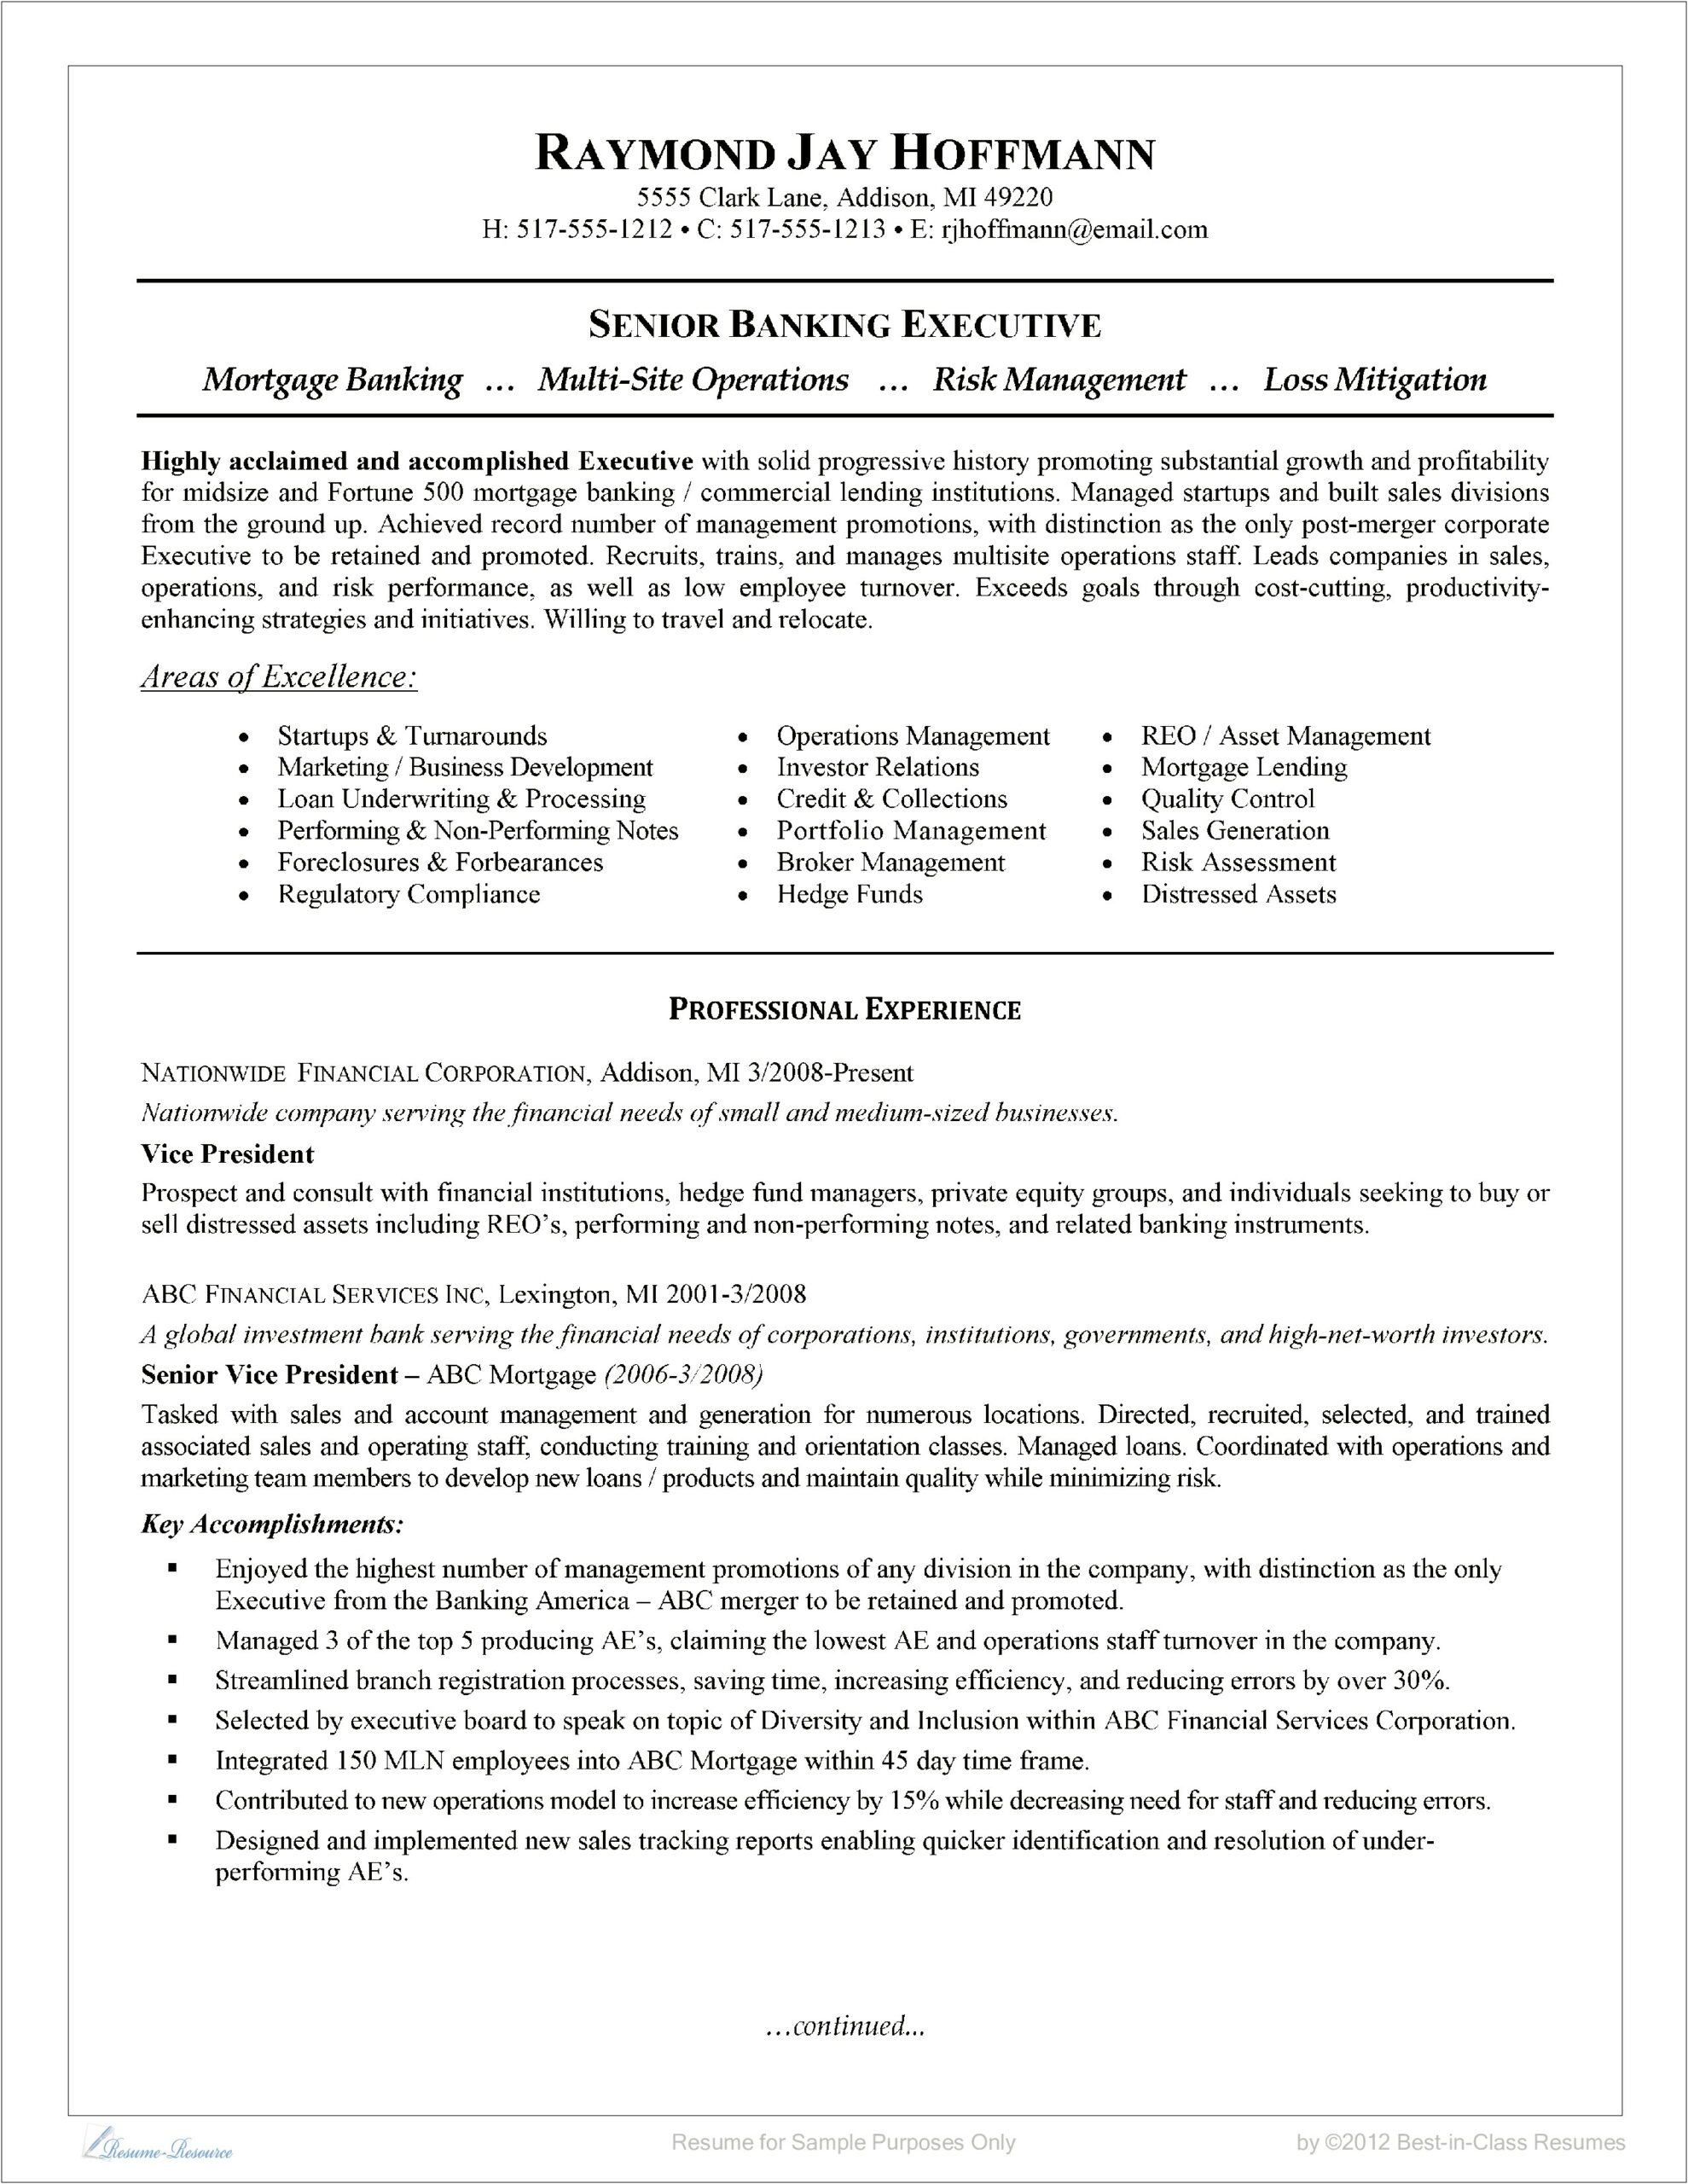 Examples Of Mortgage Banking Resumes